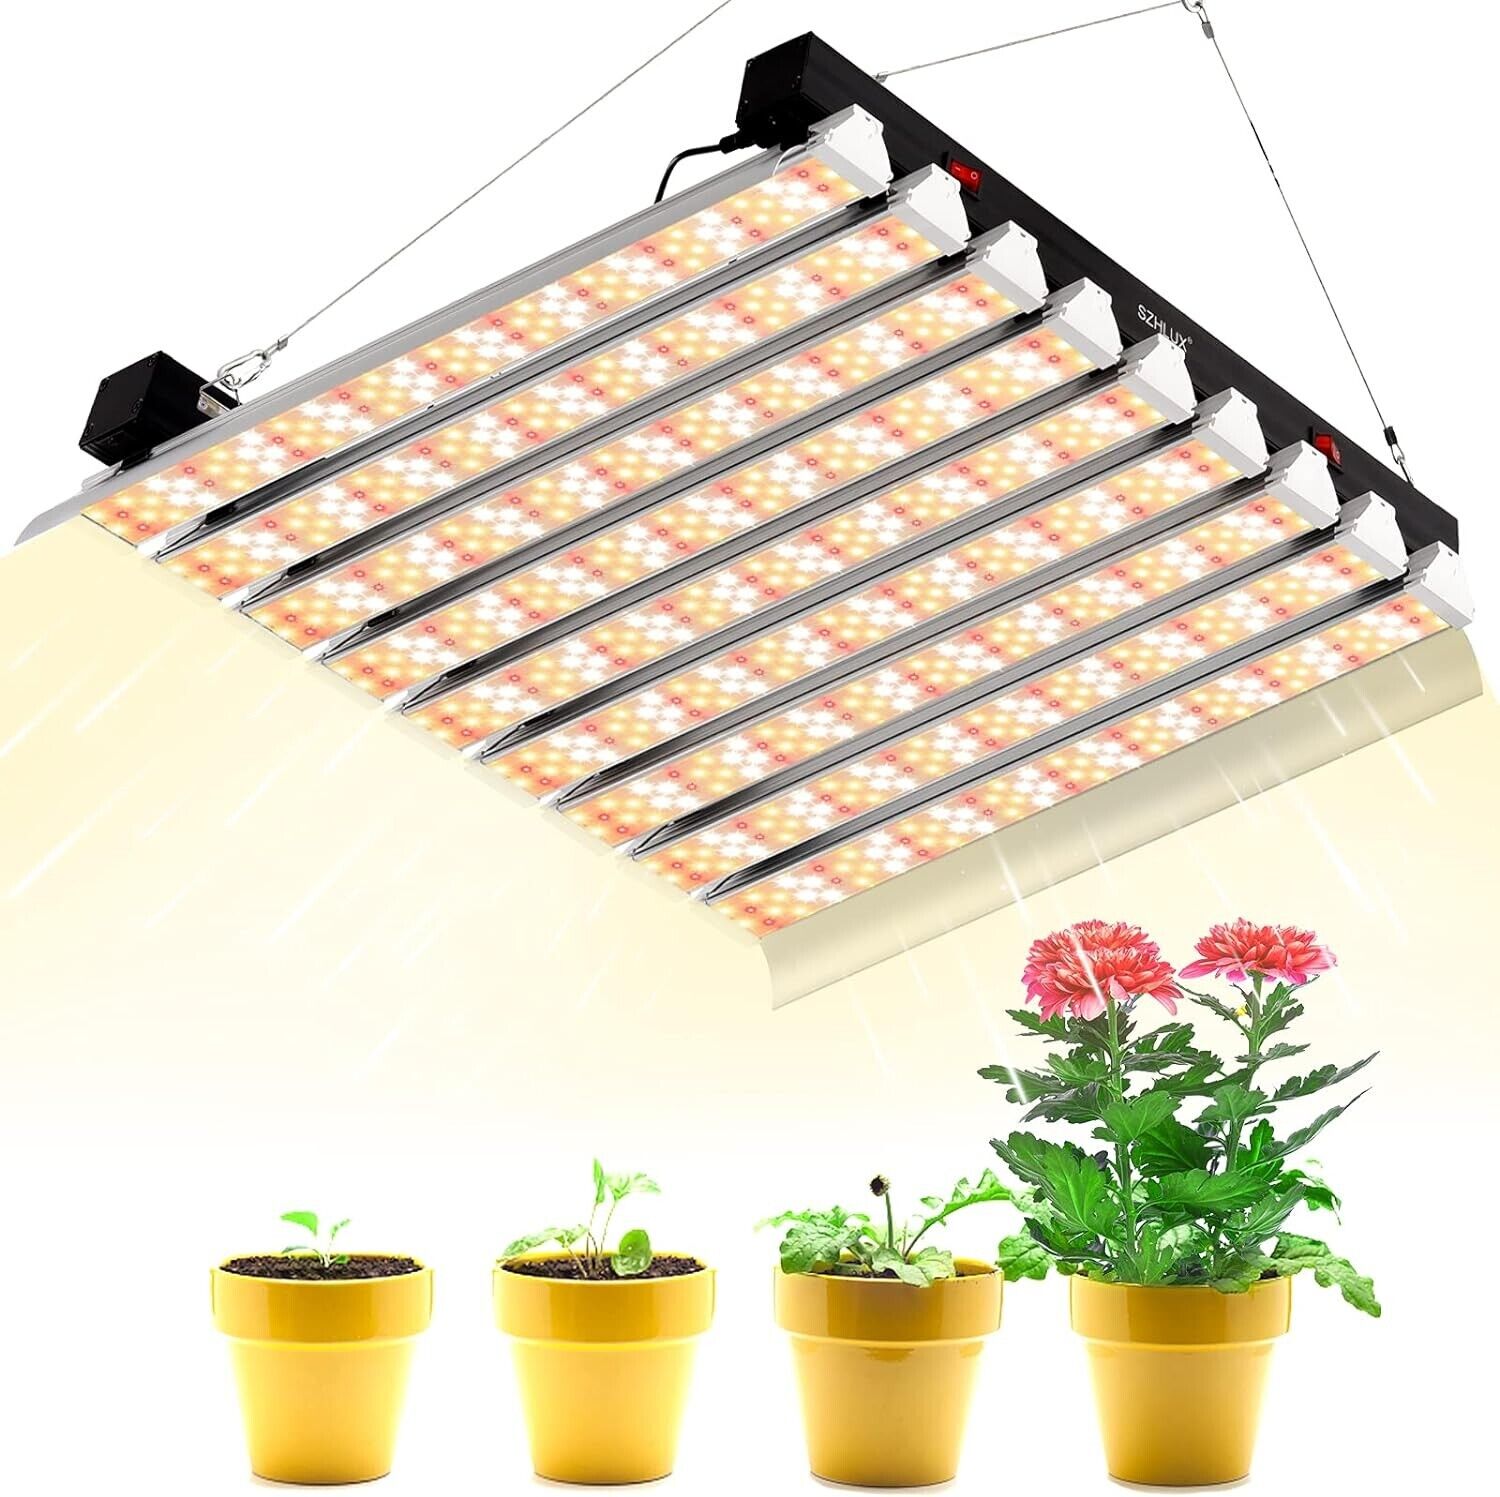 400W LED Grow Light 4×6FT Coverage Dual Switch Full Spectrum Grow Lamp Plants